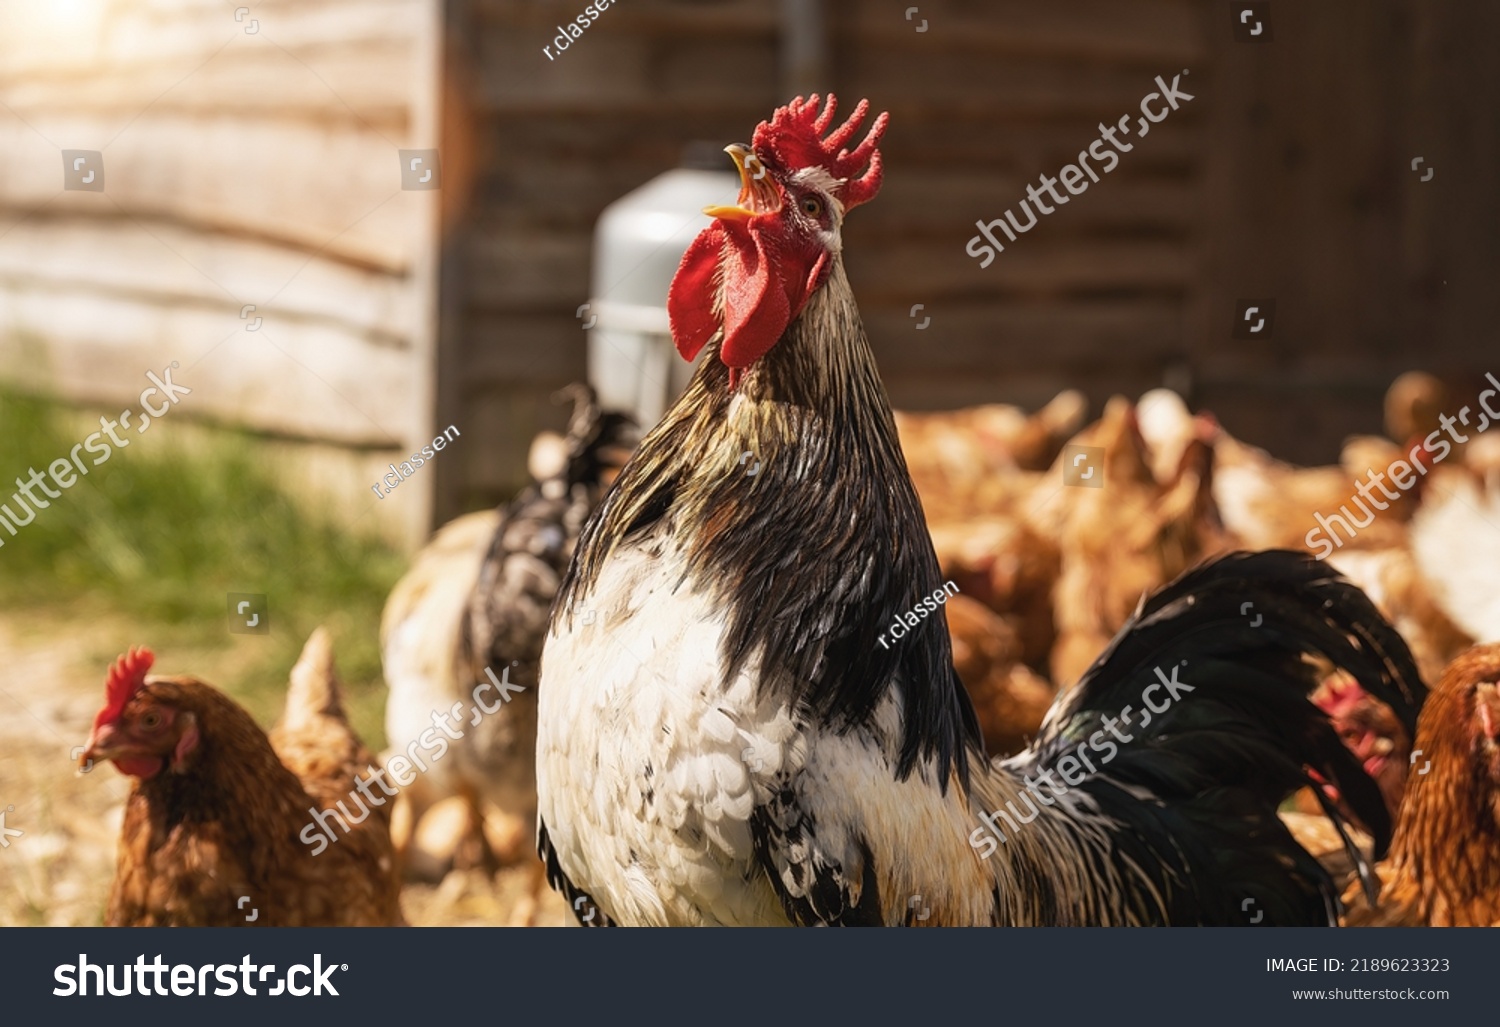 Rooster crows in a group of chickens at a hen house. Hens in bio farm. Chicken in hen house. Chickens in farm at sunny day #2189623323